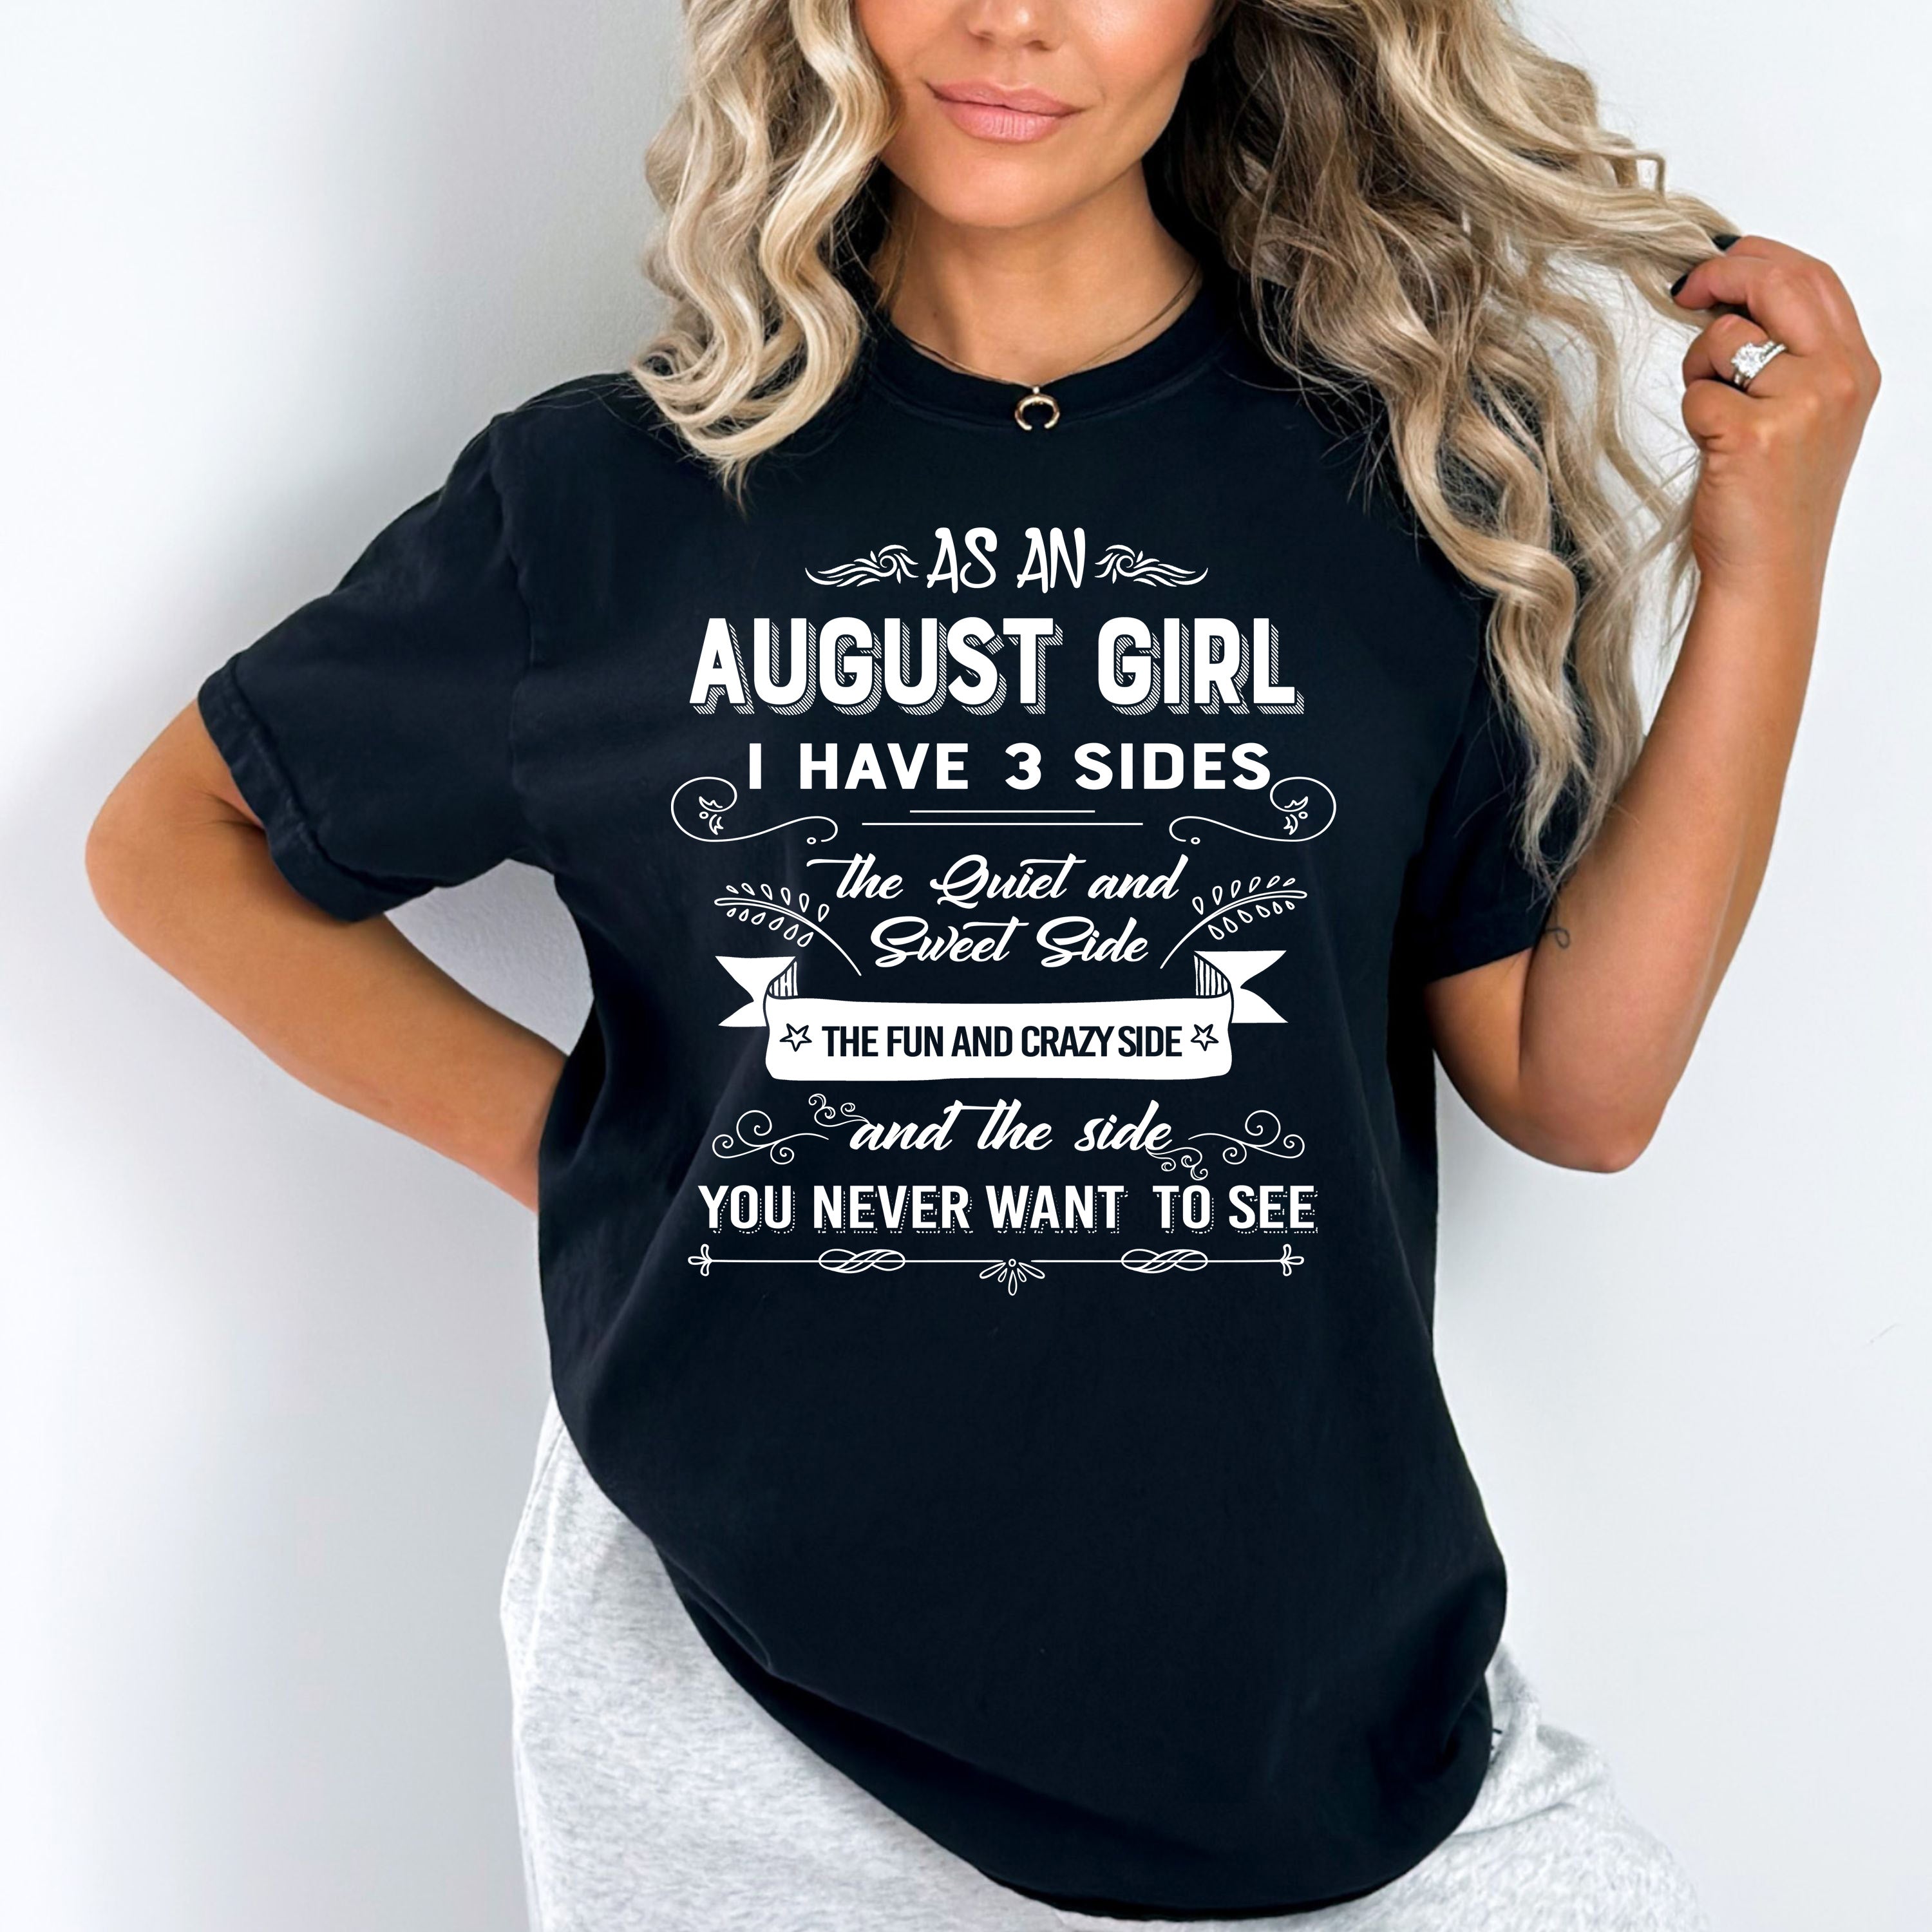 "As a August Girl I have 3 Sides"